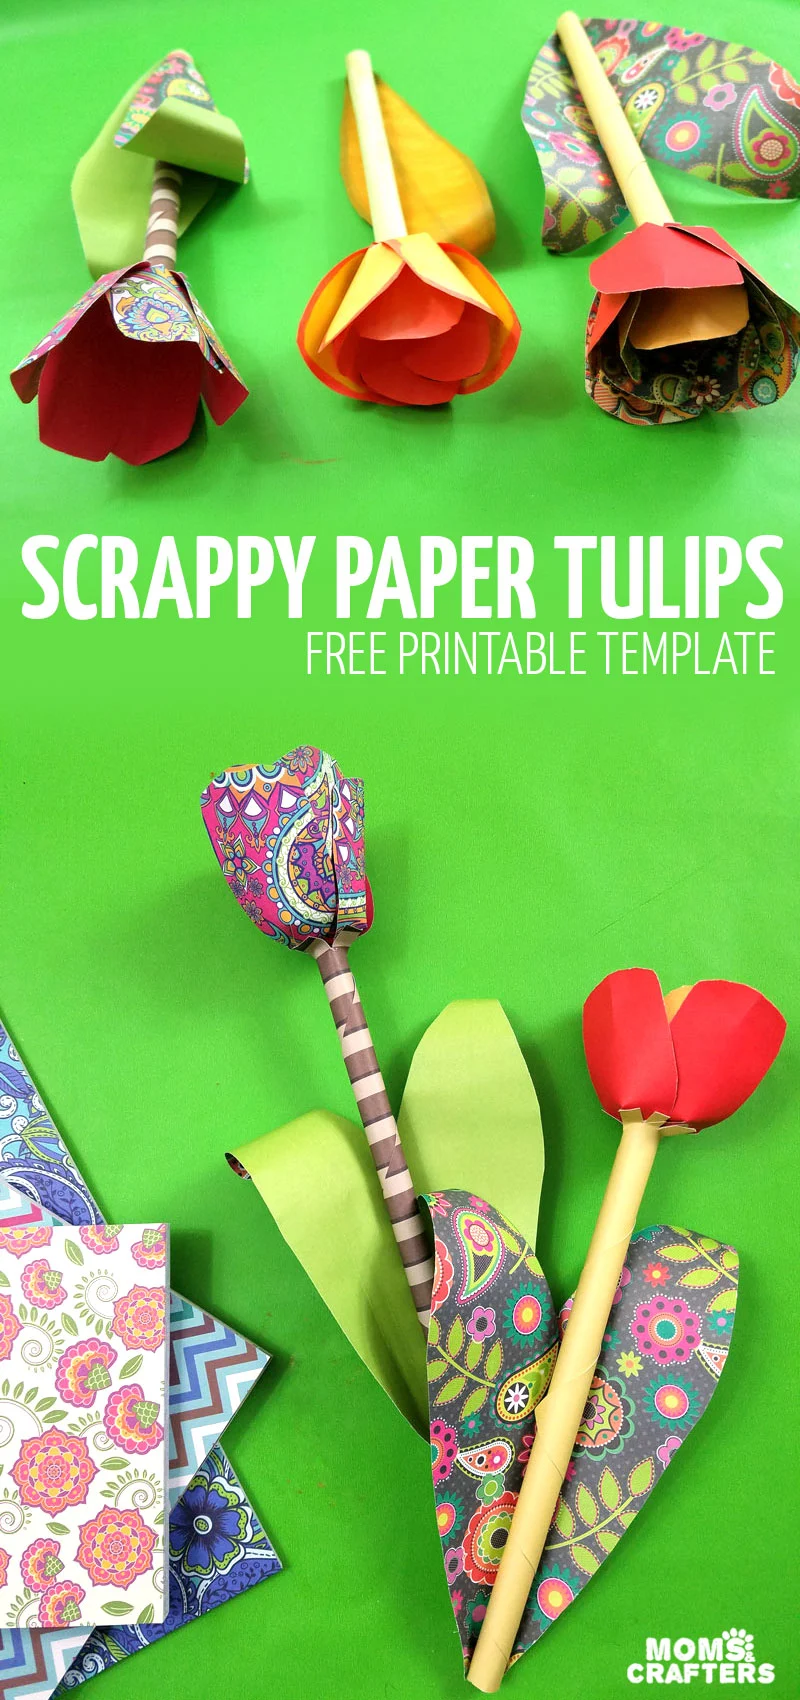 Make your own paper tulips with this free printable paper flower template! Try this fun flower spring craft for teens, tweens, and grown-ups using scrapbook paper or alcohol markers. #papercrafts #paperflowers #momsandcrafters